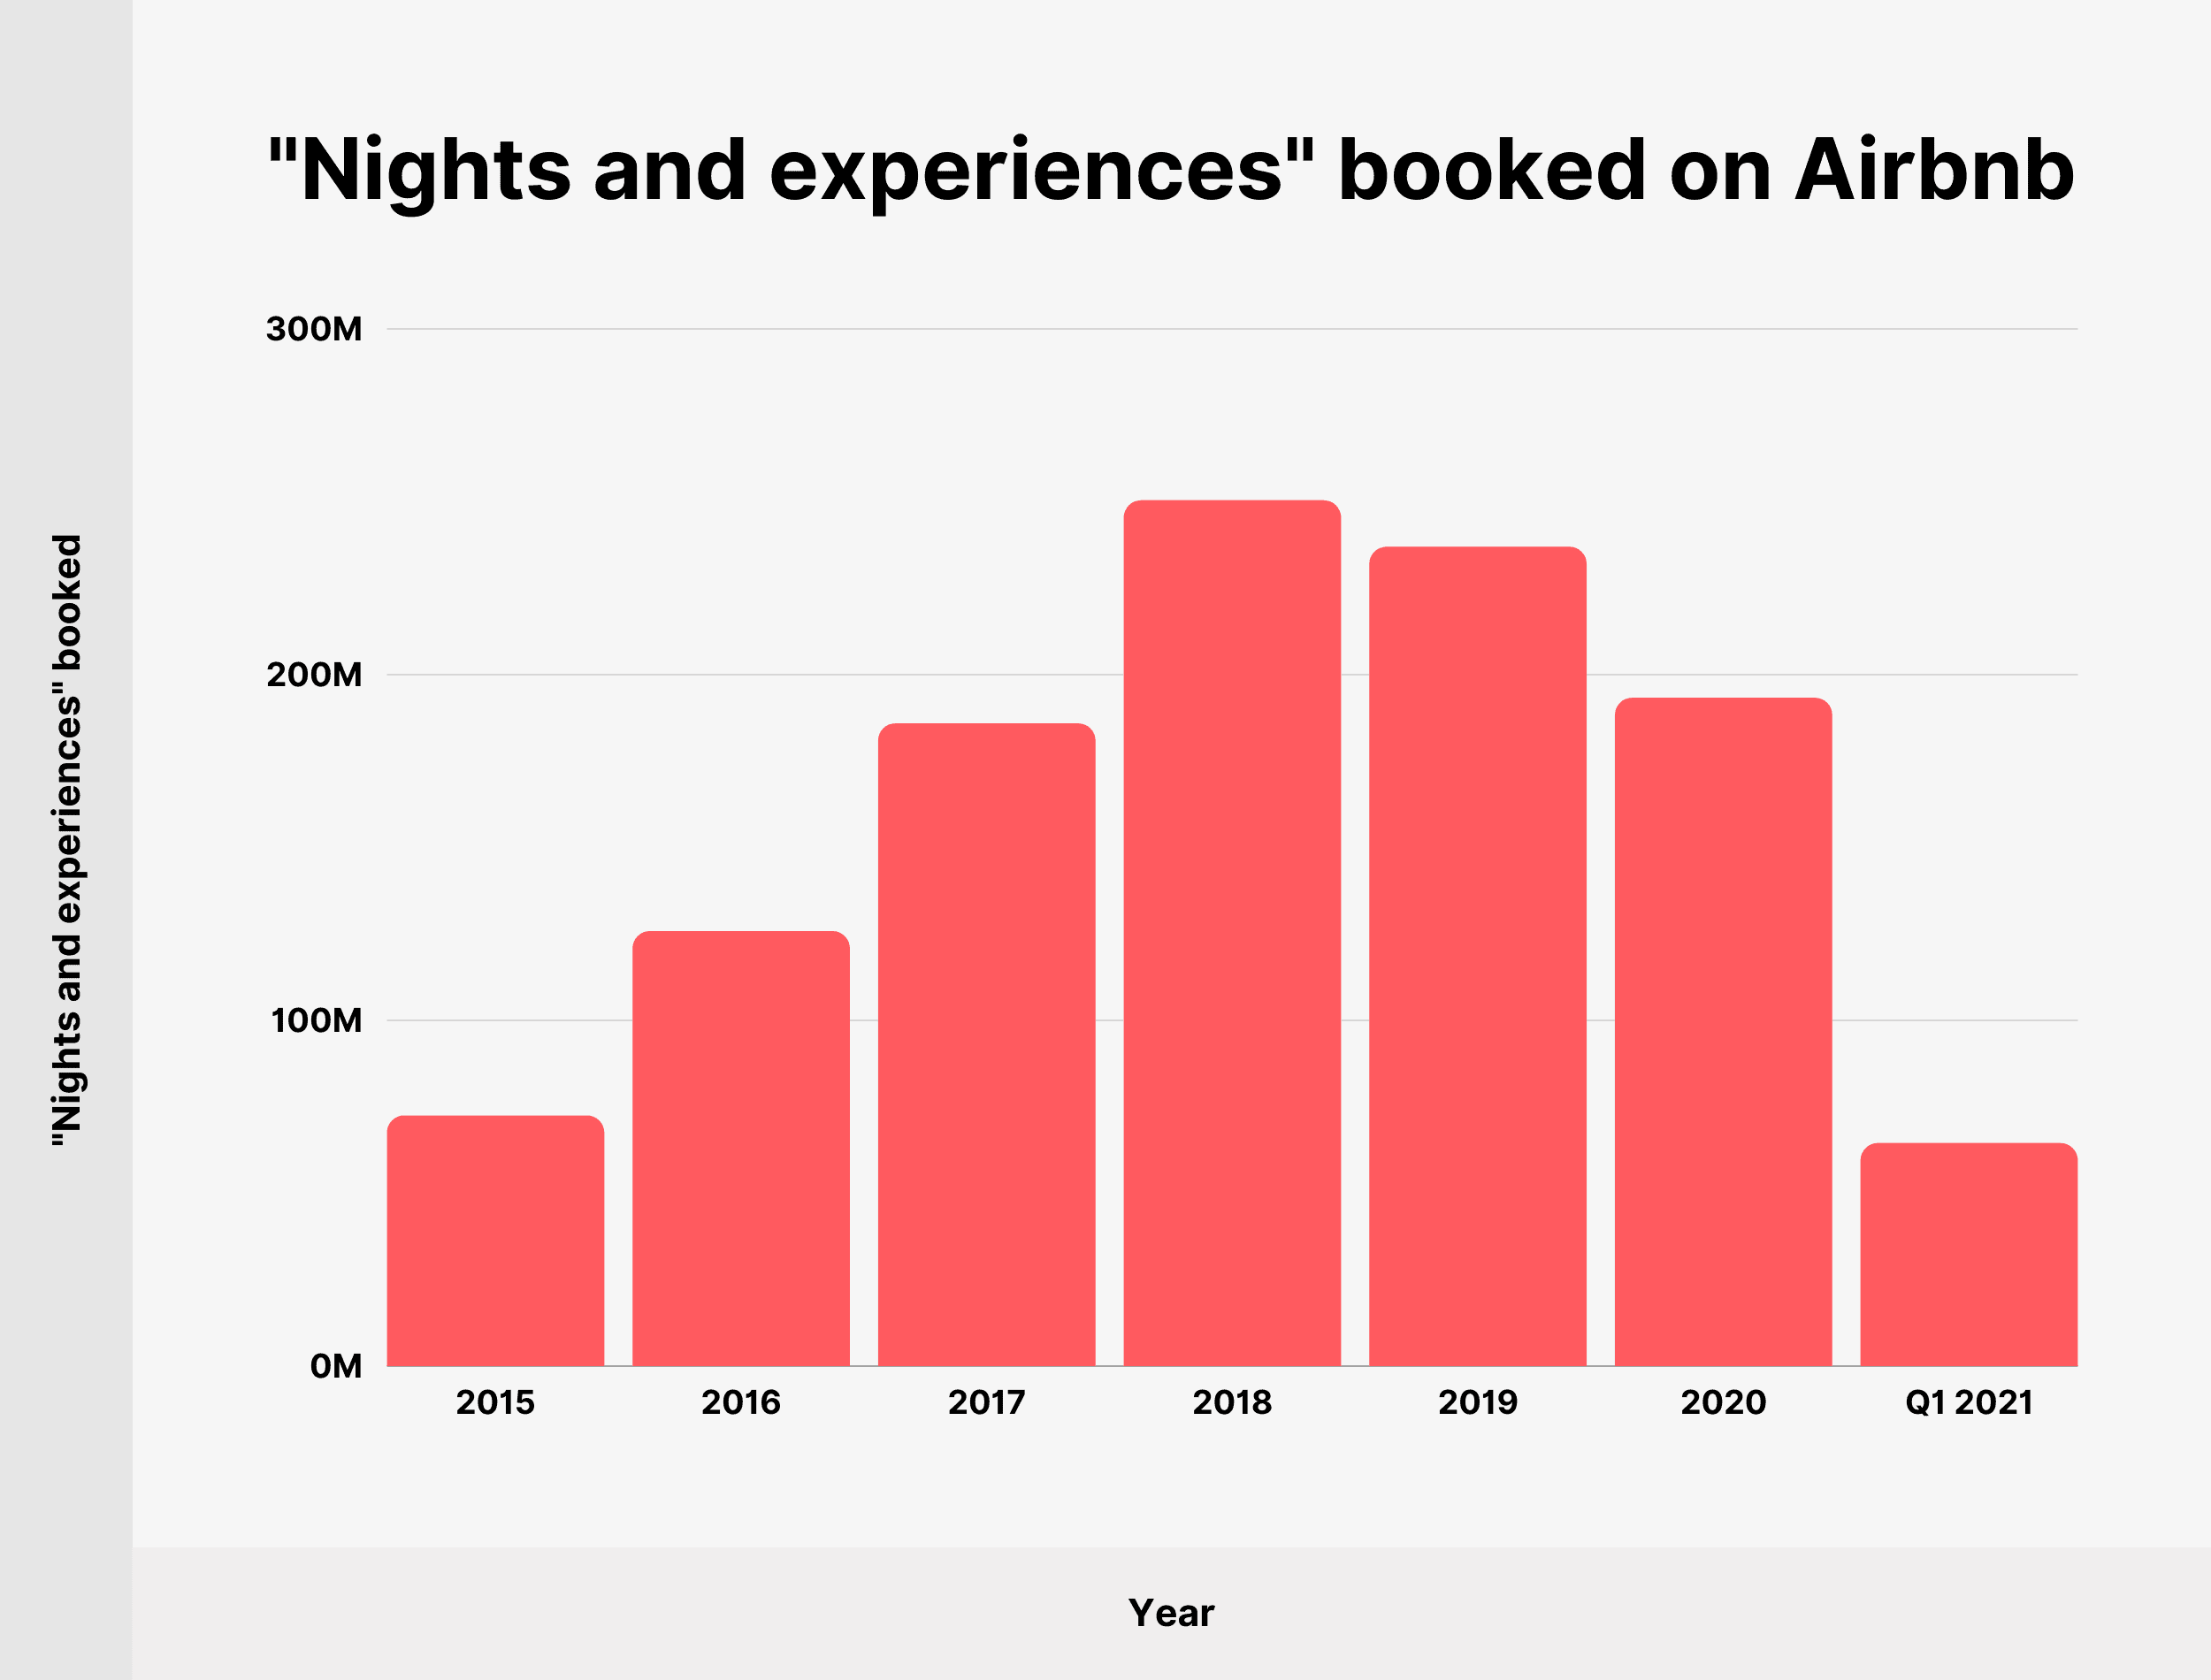 "Nights and experiences" booked on Airbnb